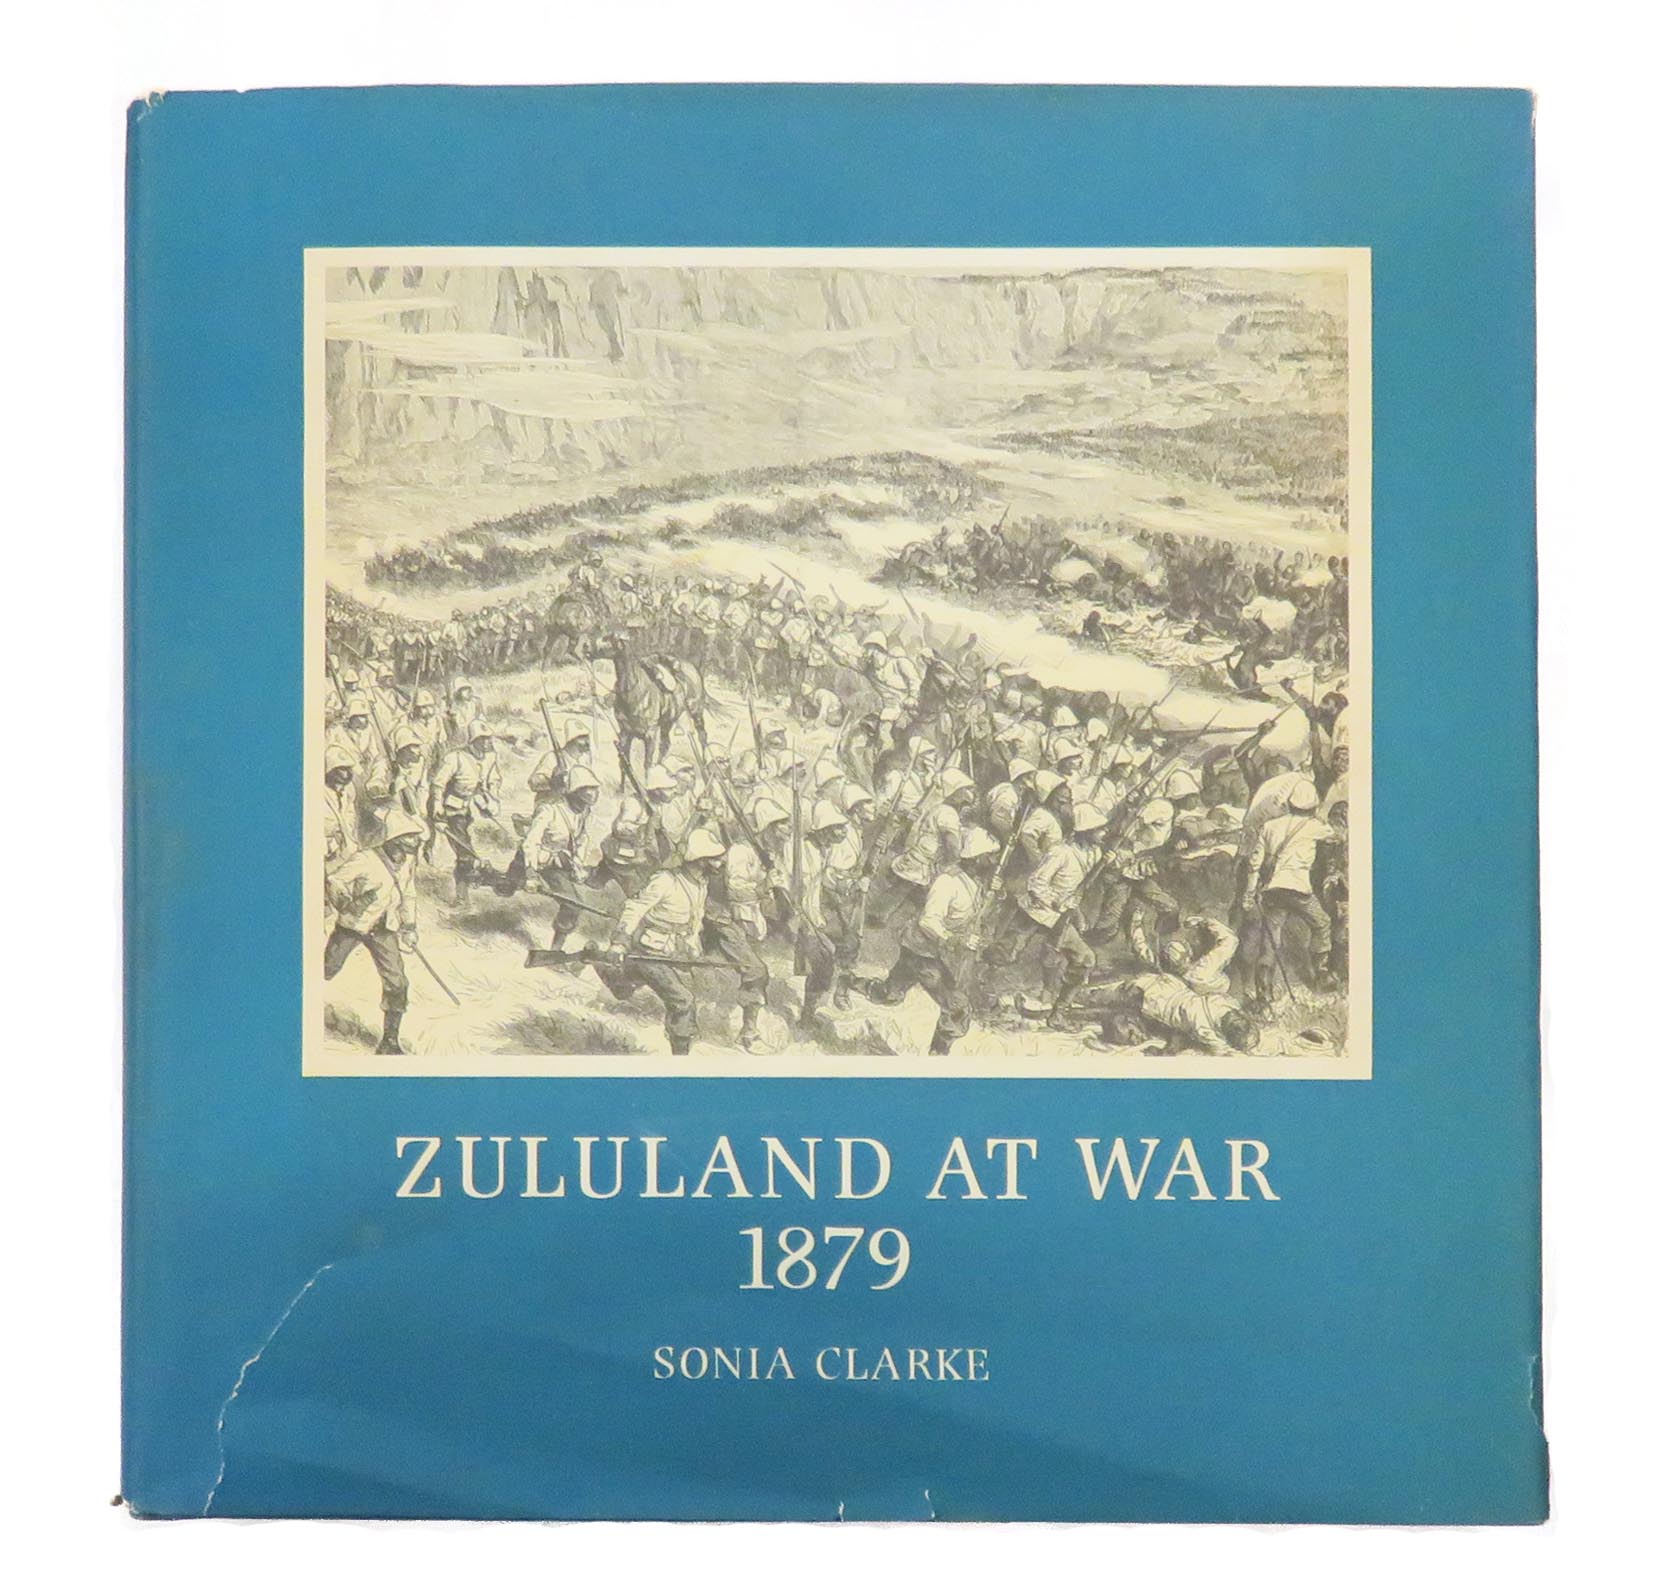 Zululand at War 1879. The Conduct of the Anglo-Zulu War